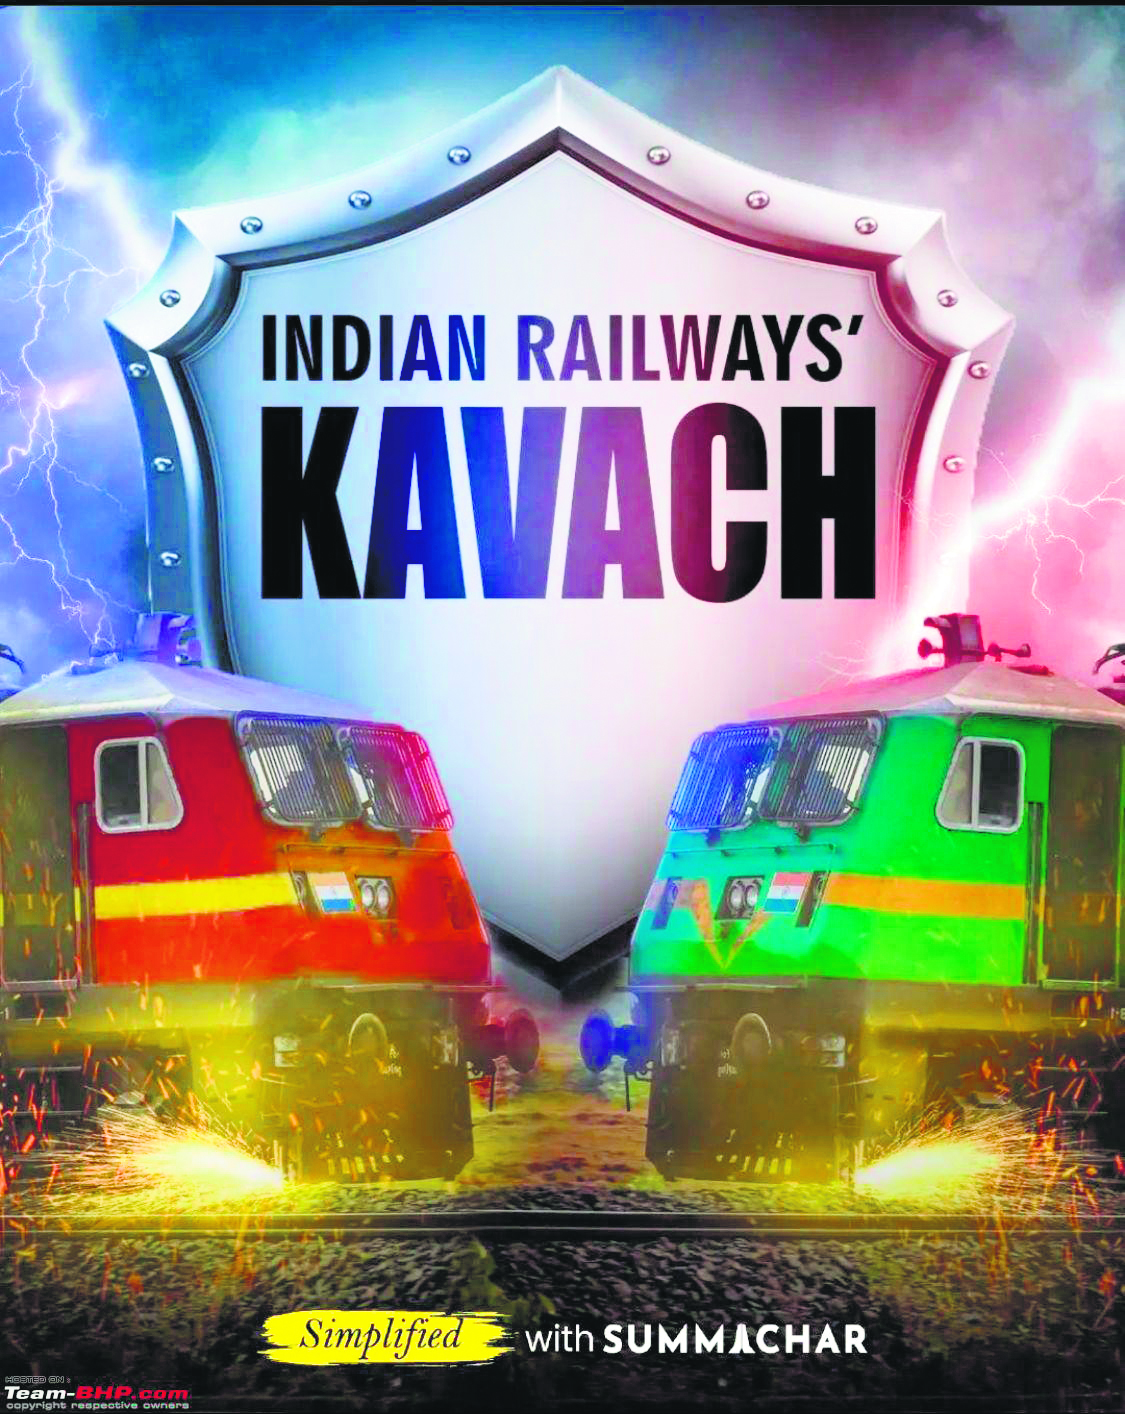 Indigenous Kavach anti-train collision system tested successfully